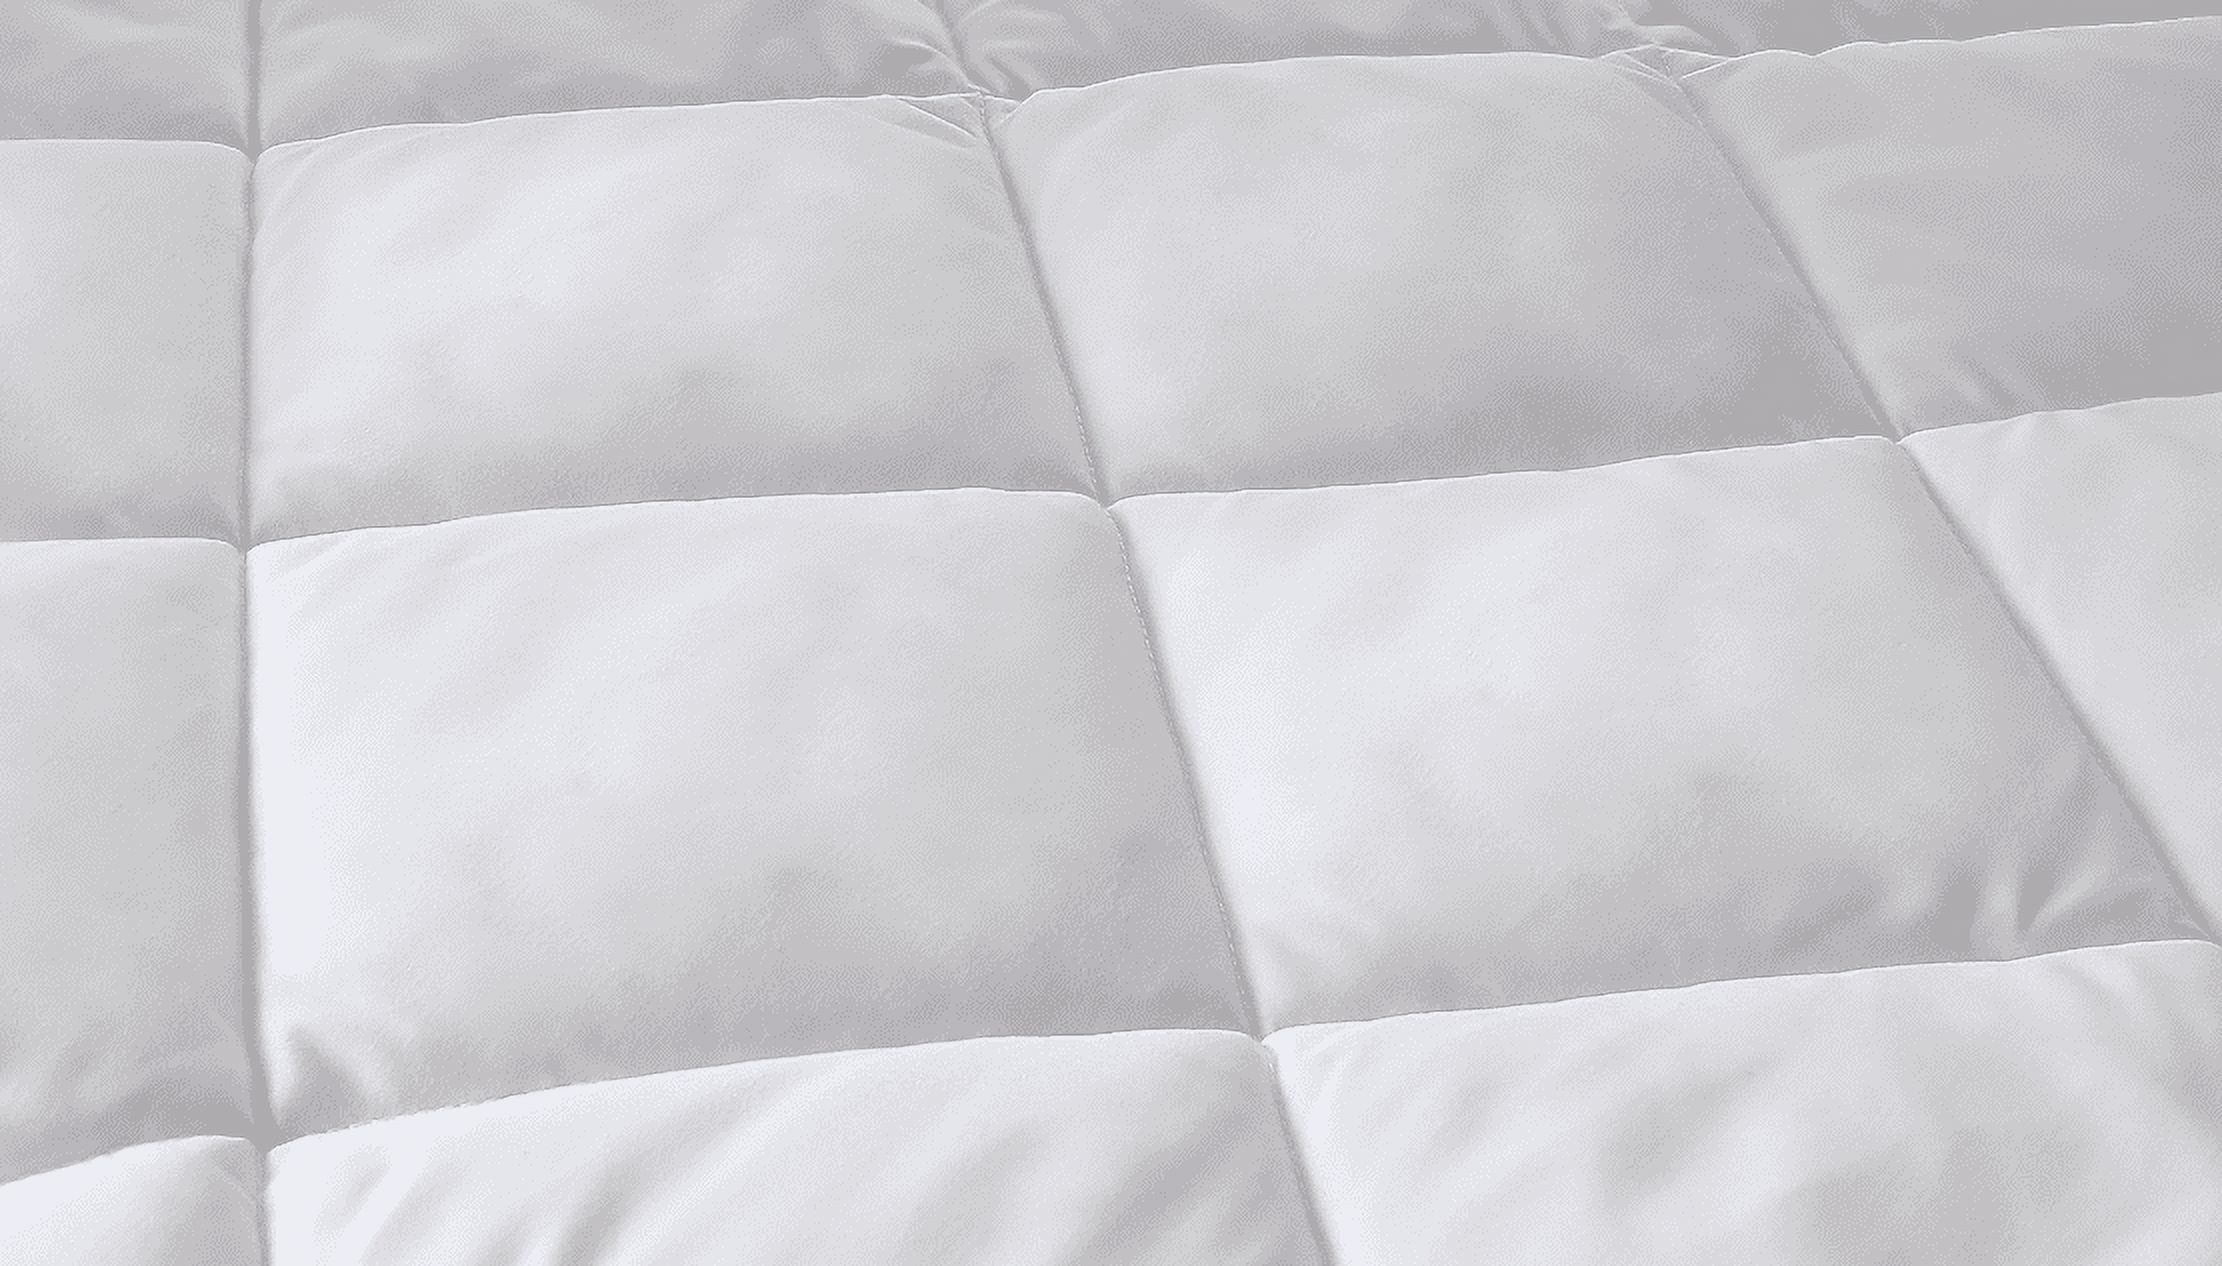 80% off Mainstays Holiday Bundle- Includes Standard Pillow and Twin-XL Mattress Pad - image 4 of 5